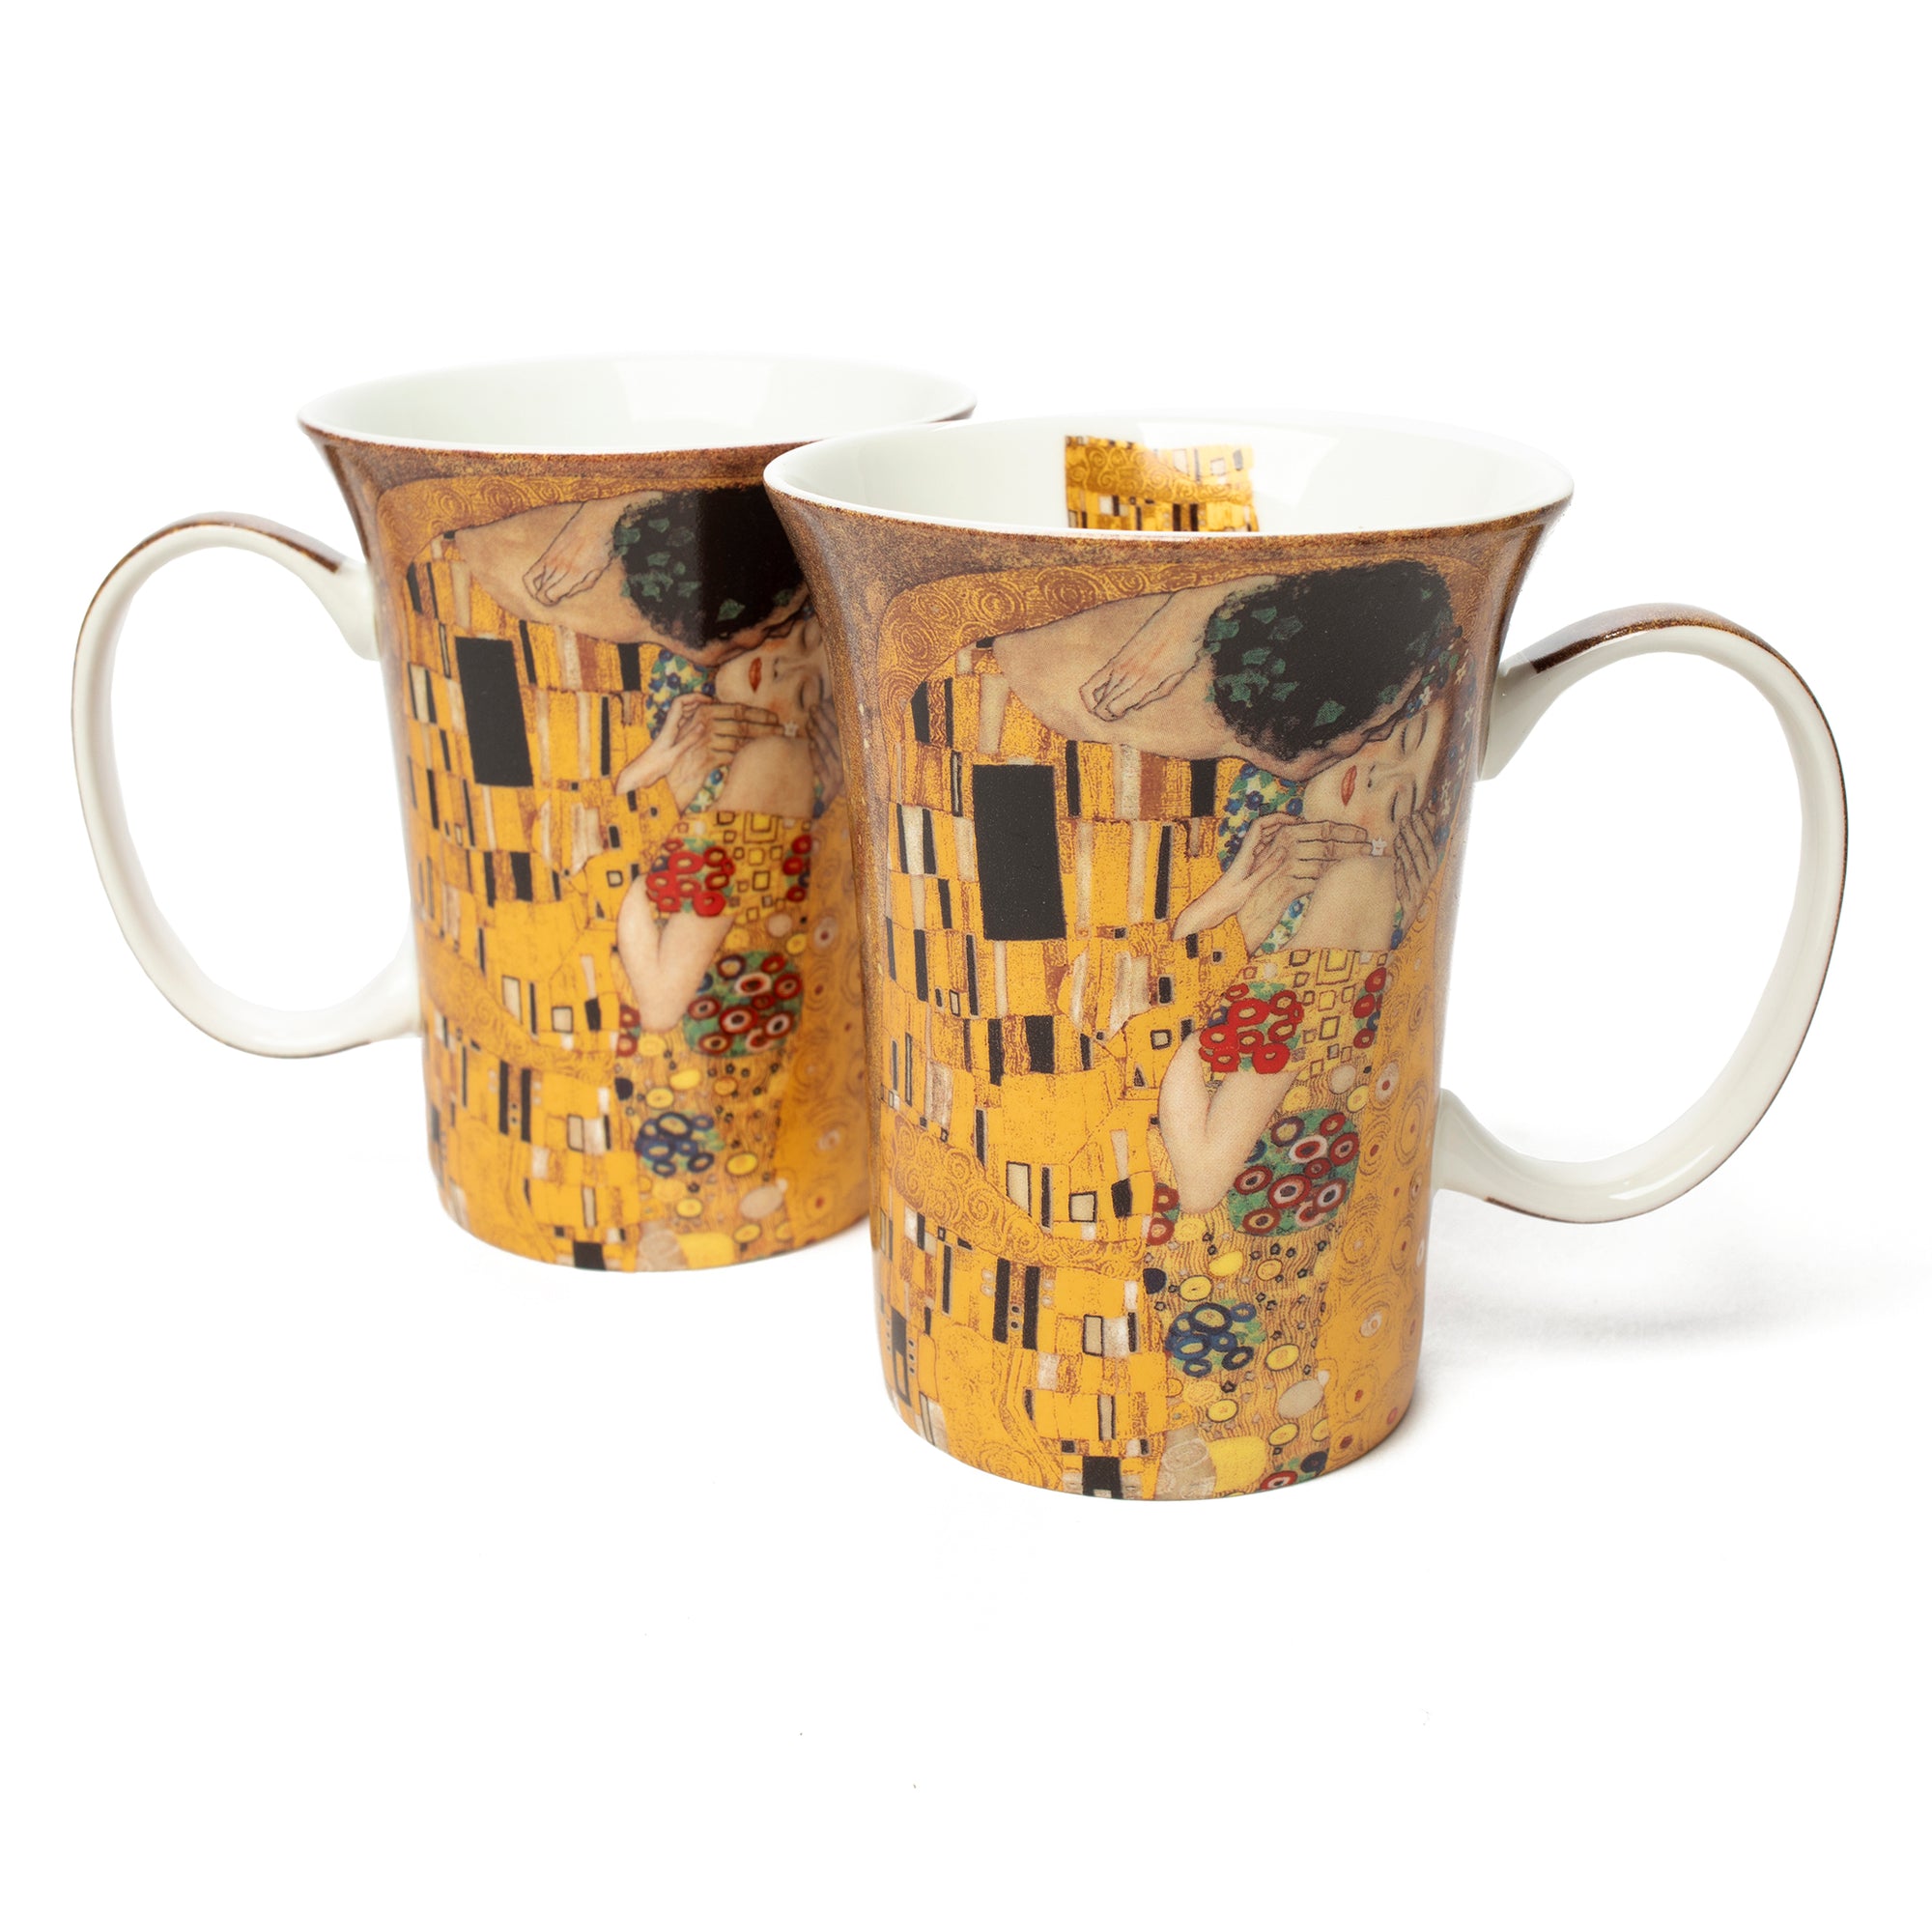 Pair of Fine Bone China Mugs featuring Klimt's The Kiss | Getty Store